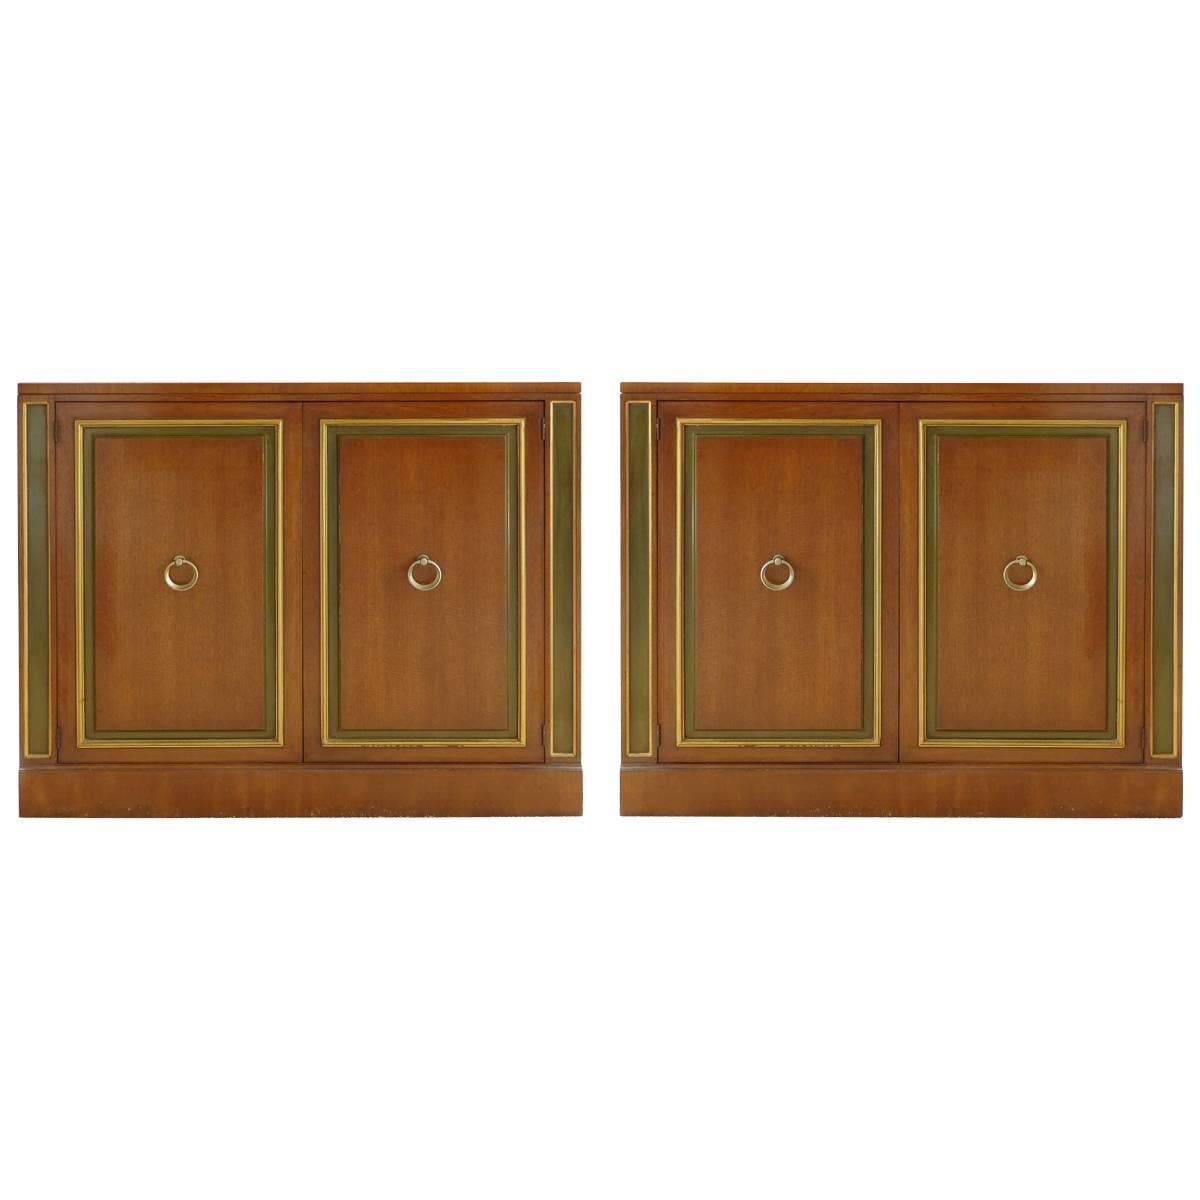 Pair of Hollywood Regency Cabinets by Dorothy Draper for Heritage Furniture